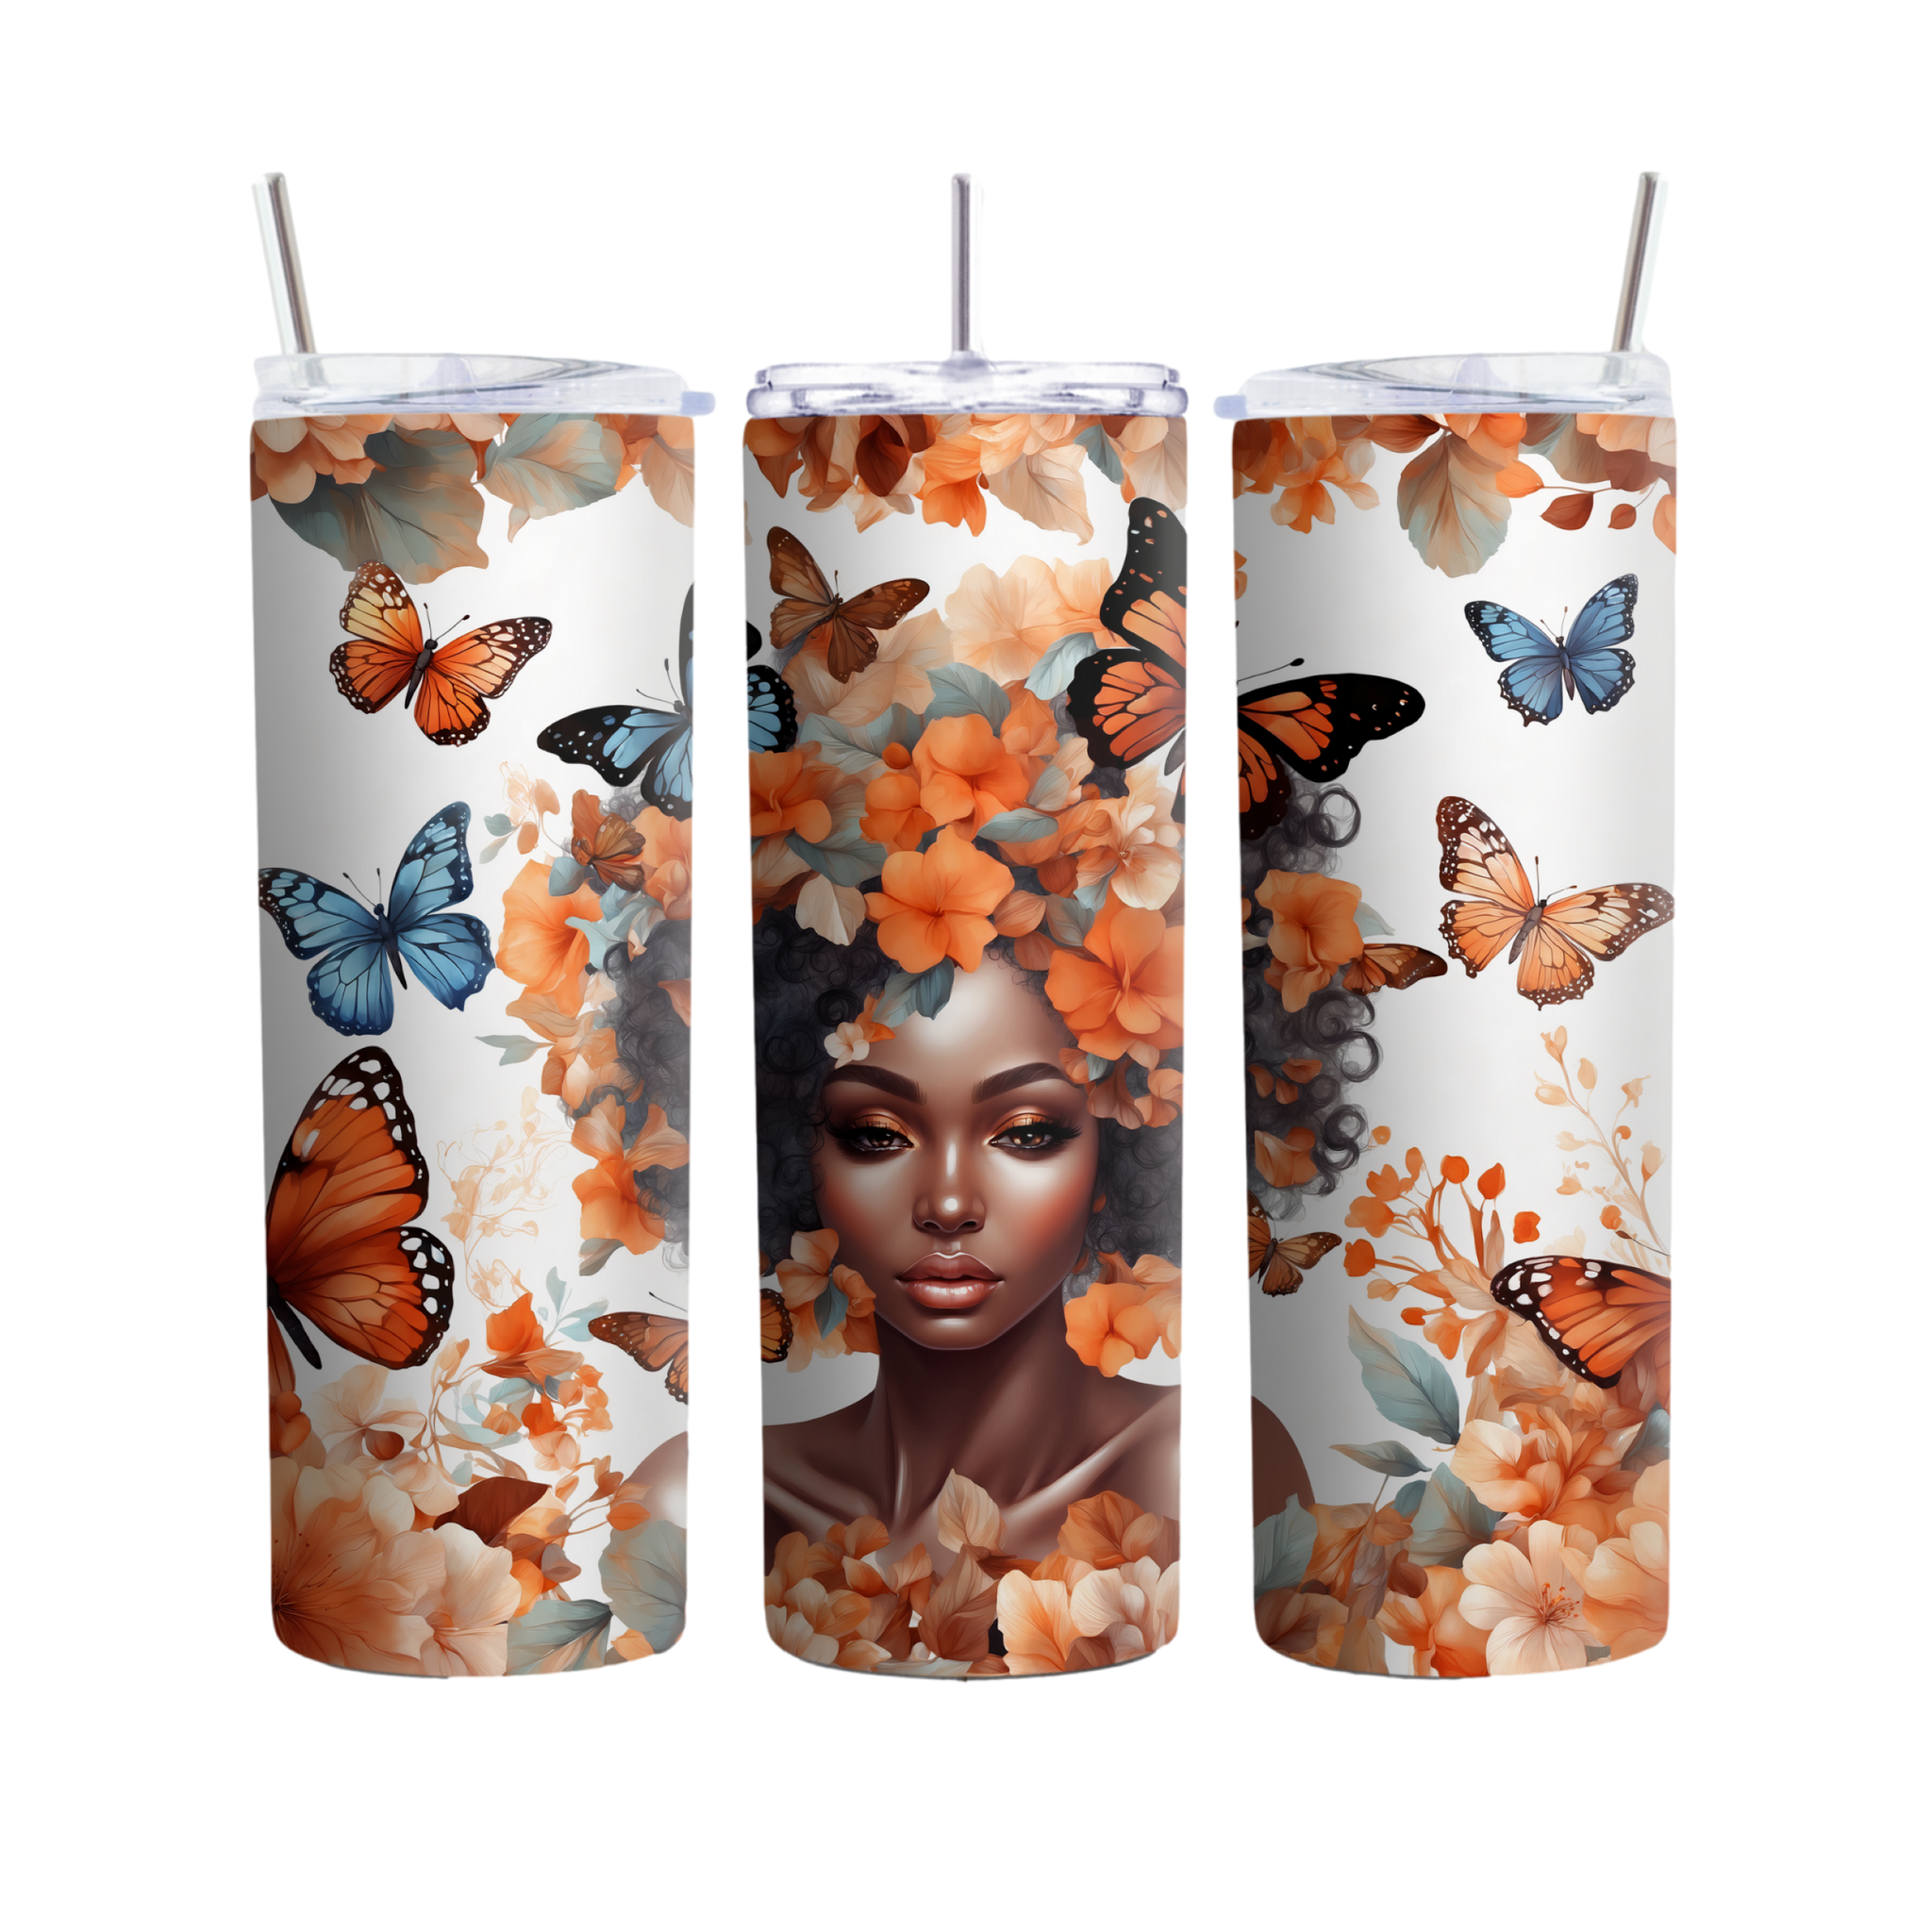 Inspire Me Positive, Black Girl Magic 20oz Tumbler, Butterfly and Orange Floral, Inspirational Empowerment, Perfect Gift for Her